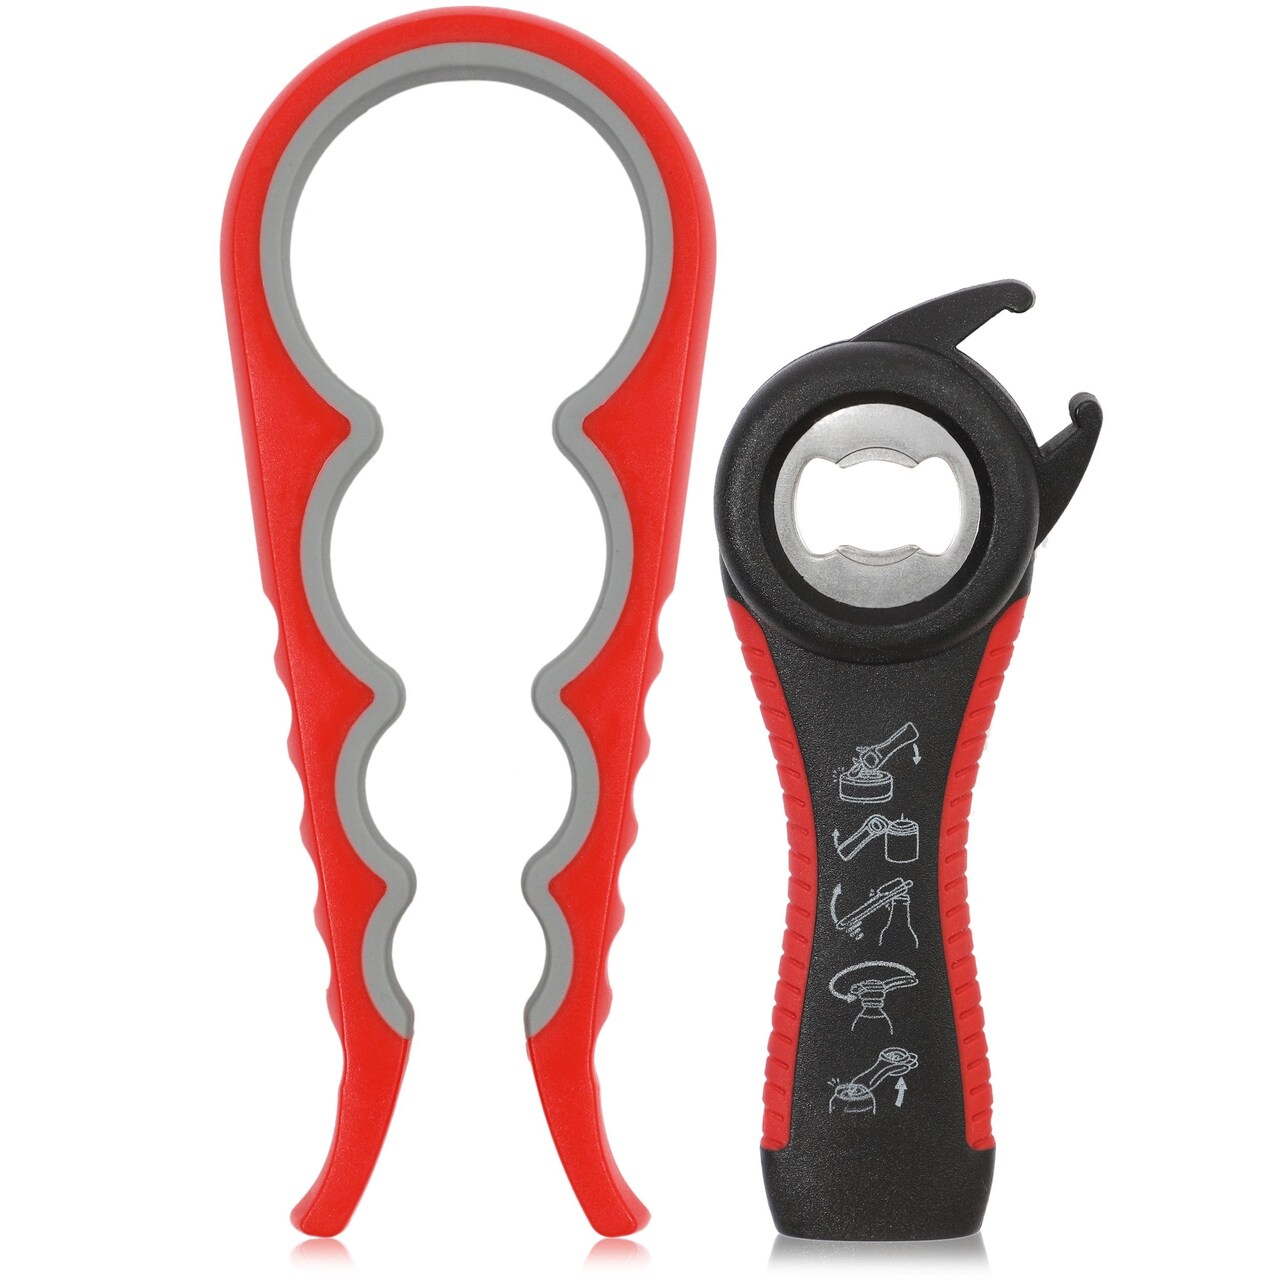 Silicone and Metal 5-in-1 Bottle Opener - Easy Grip Jar Opener Tool for  Home, Special Events, Camping, Arthritis Suffers (2-Piece Set)